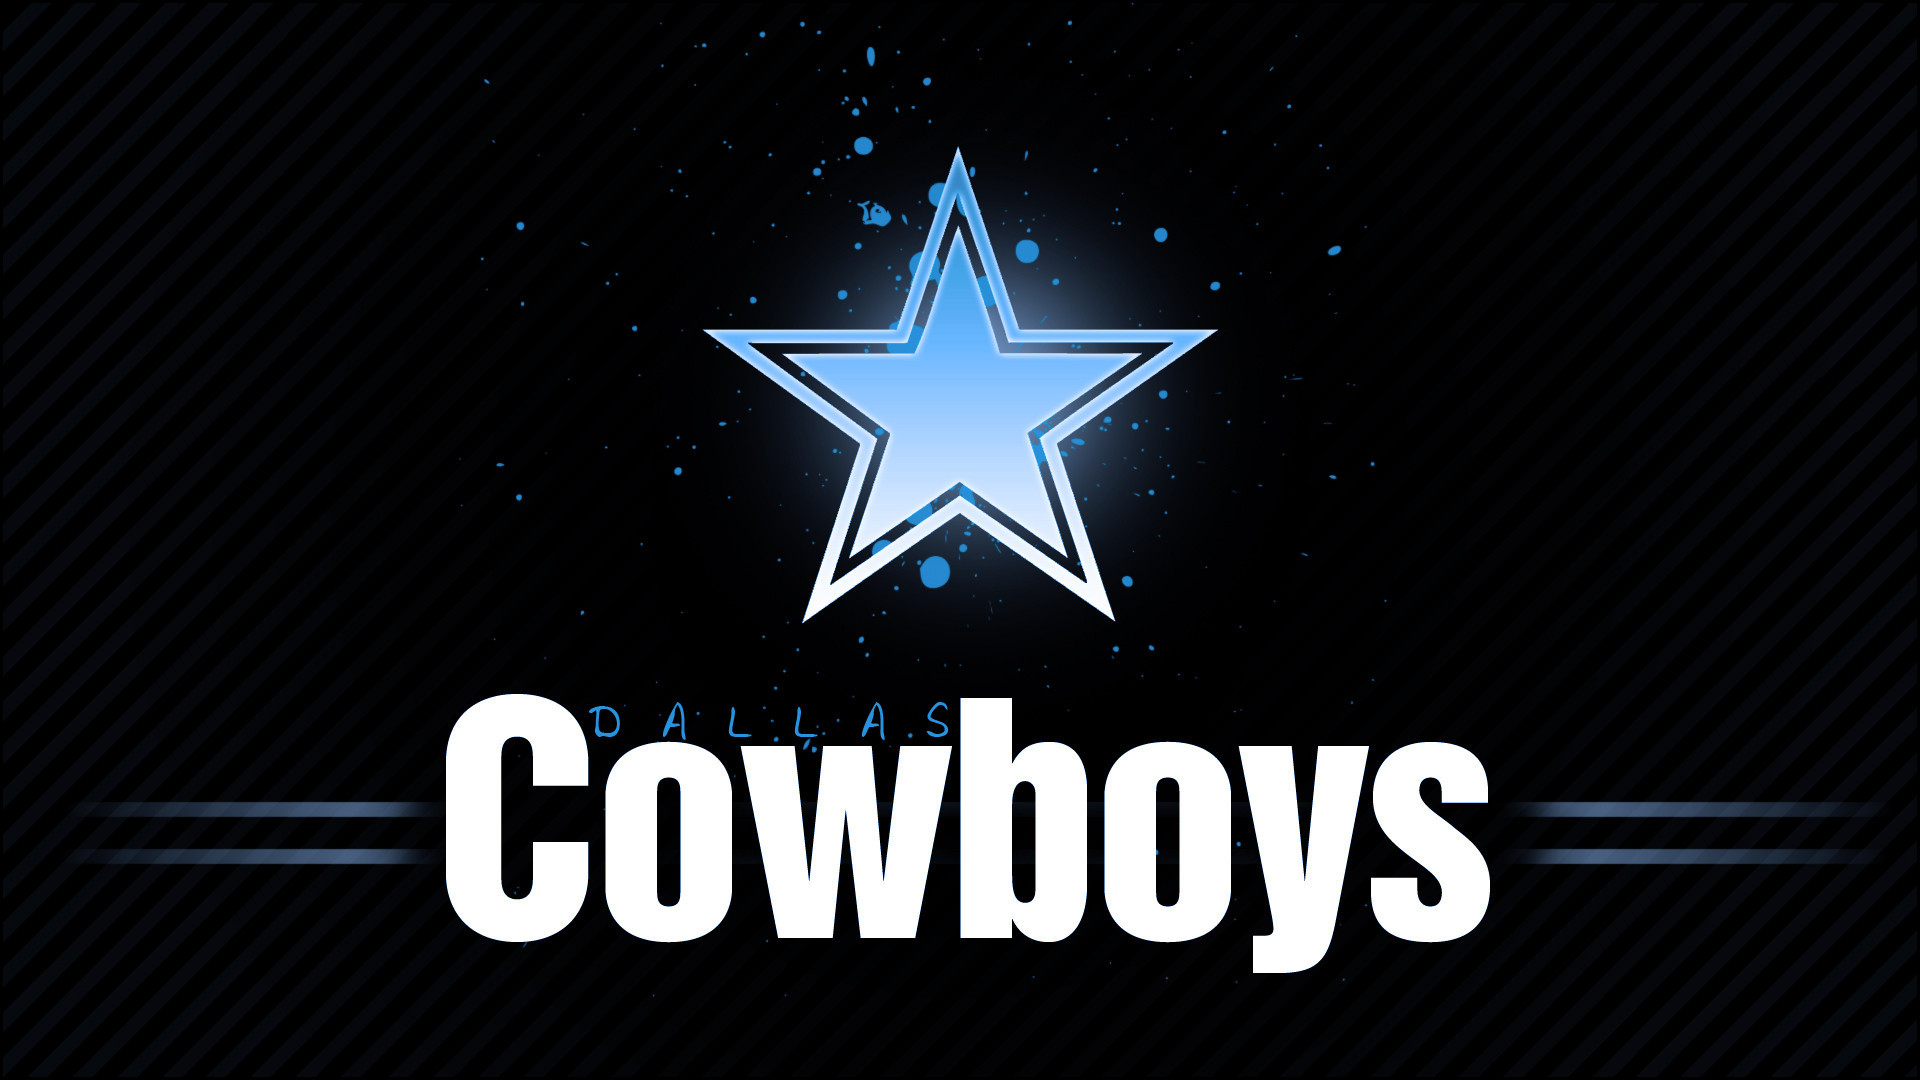 1920x1080 light dallas cowboys logo wallpaper hd background wallpapers free amazing  cool smart phone 4k high definition